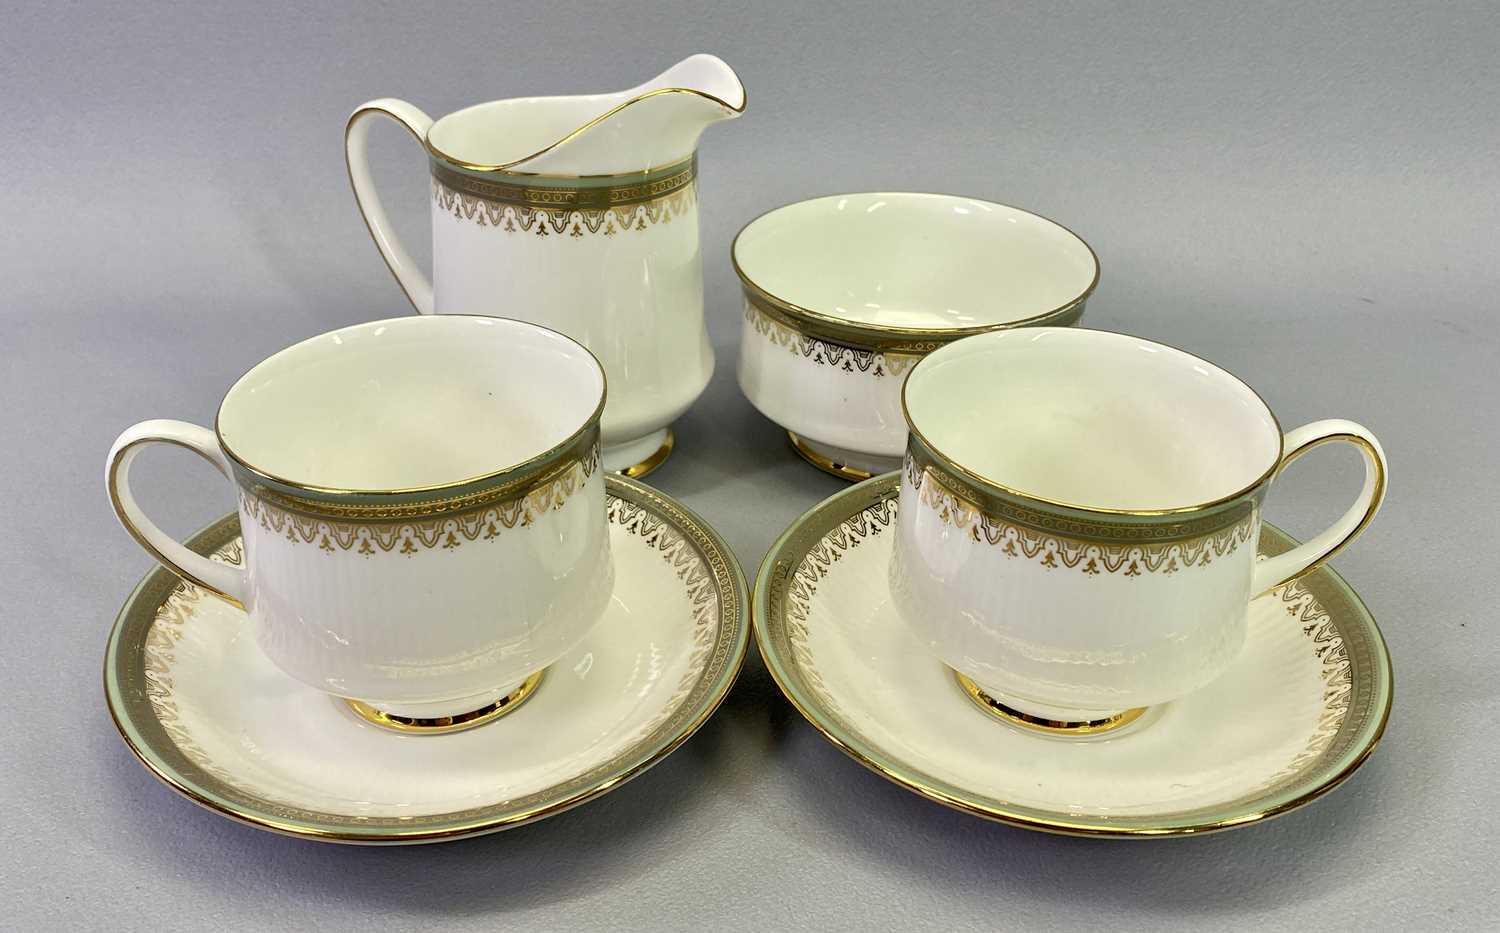 PARAGON KENSINGTON TEA & DINNERWARE, 62 PIECES - consist of two vegetable tureens with covers, gravy - Image 2 of 2